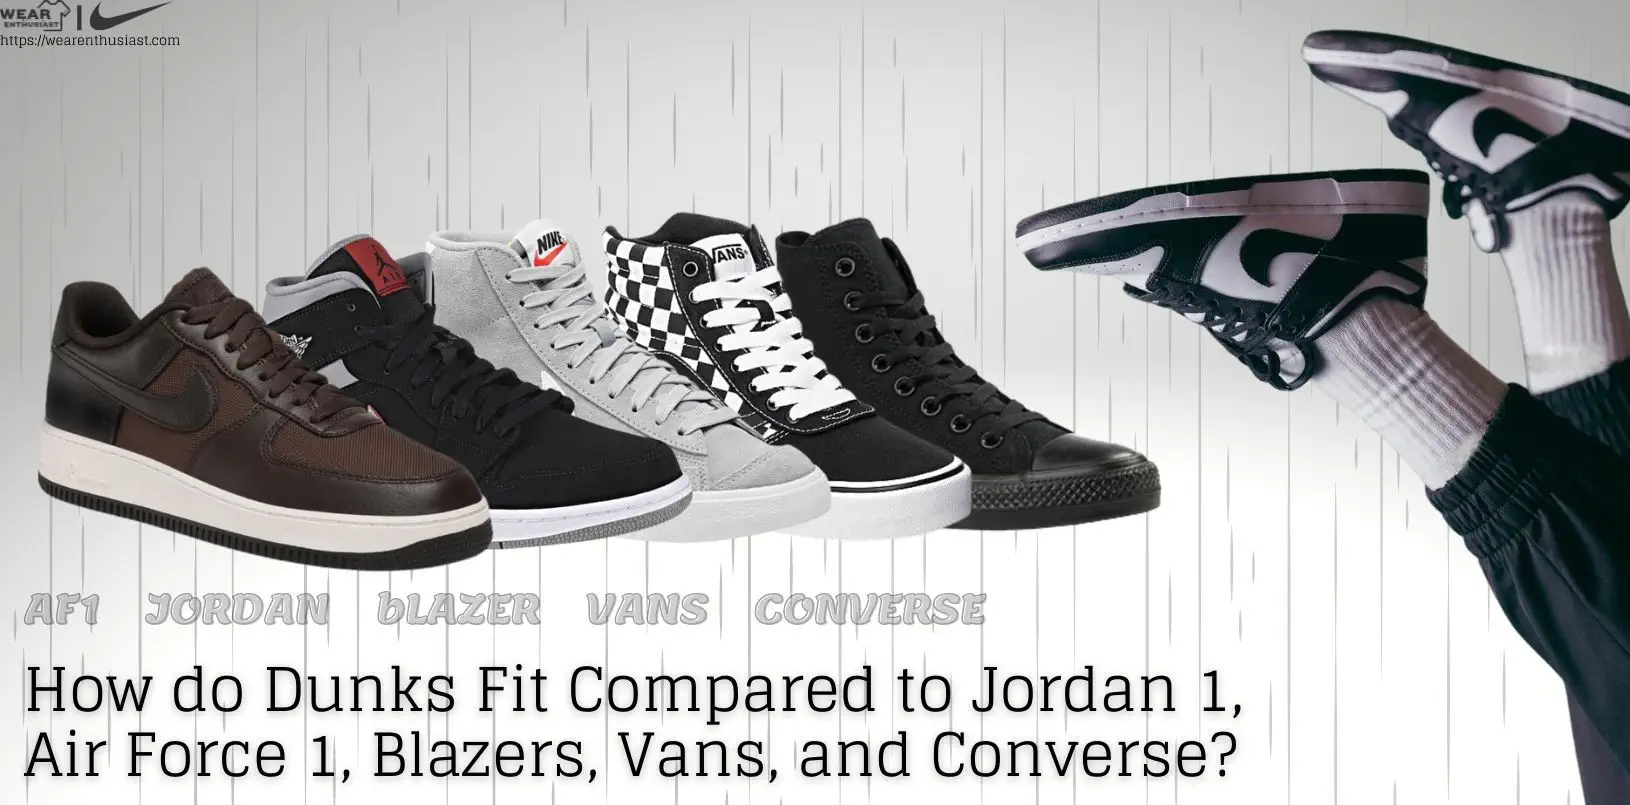 How do Dunks Fit Compared to Jordan 1, Air Force 1, Blazers, Vans, and Converse?